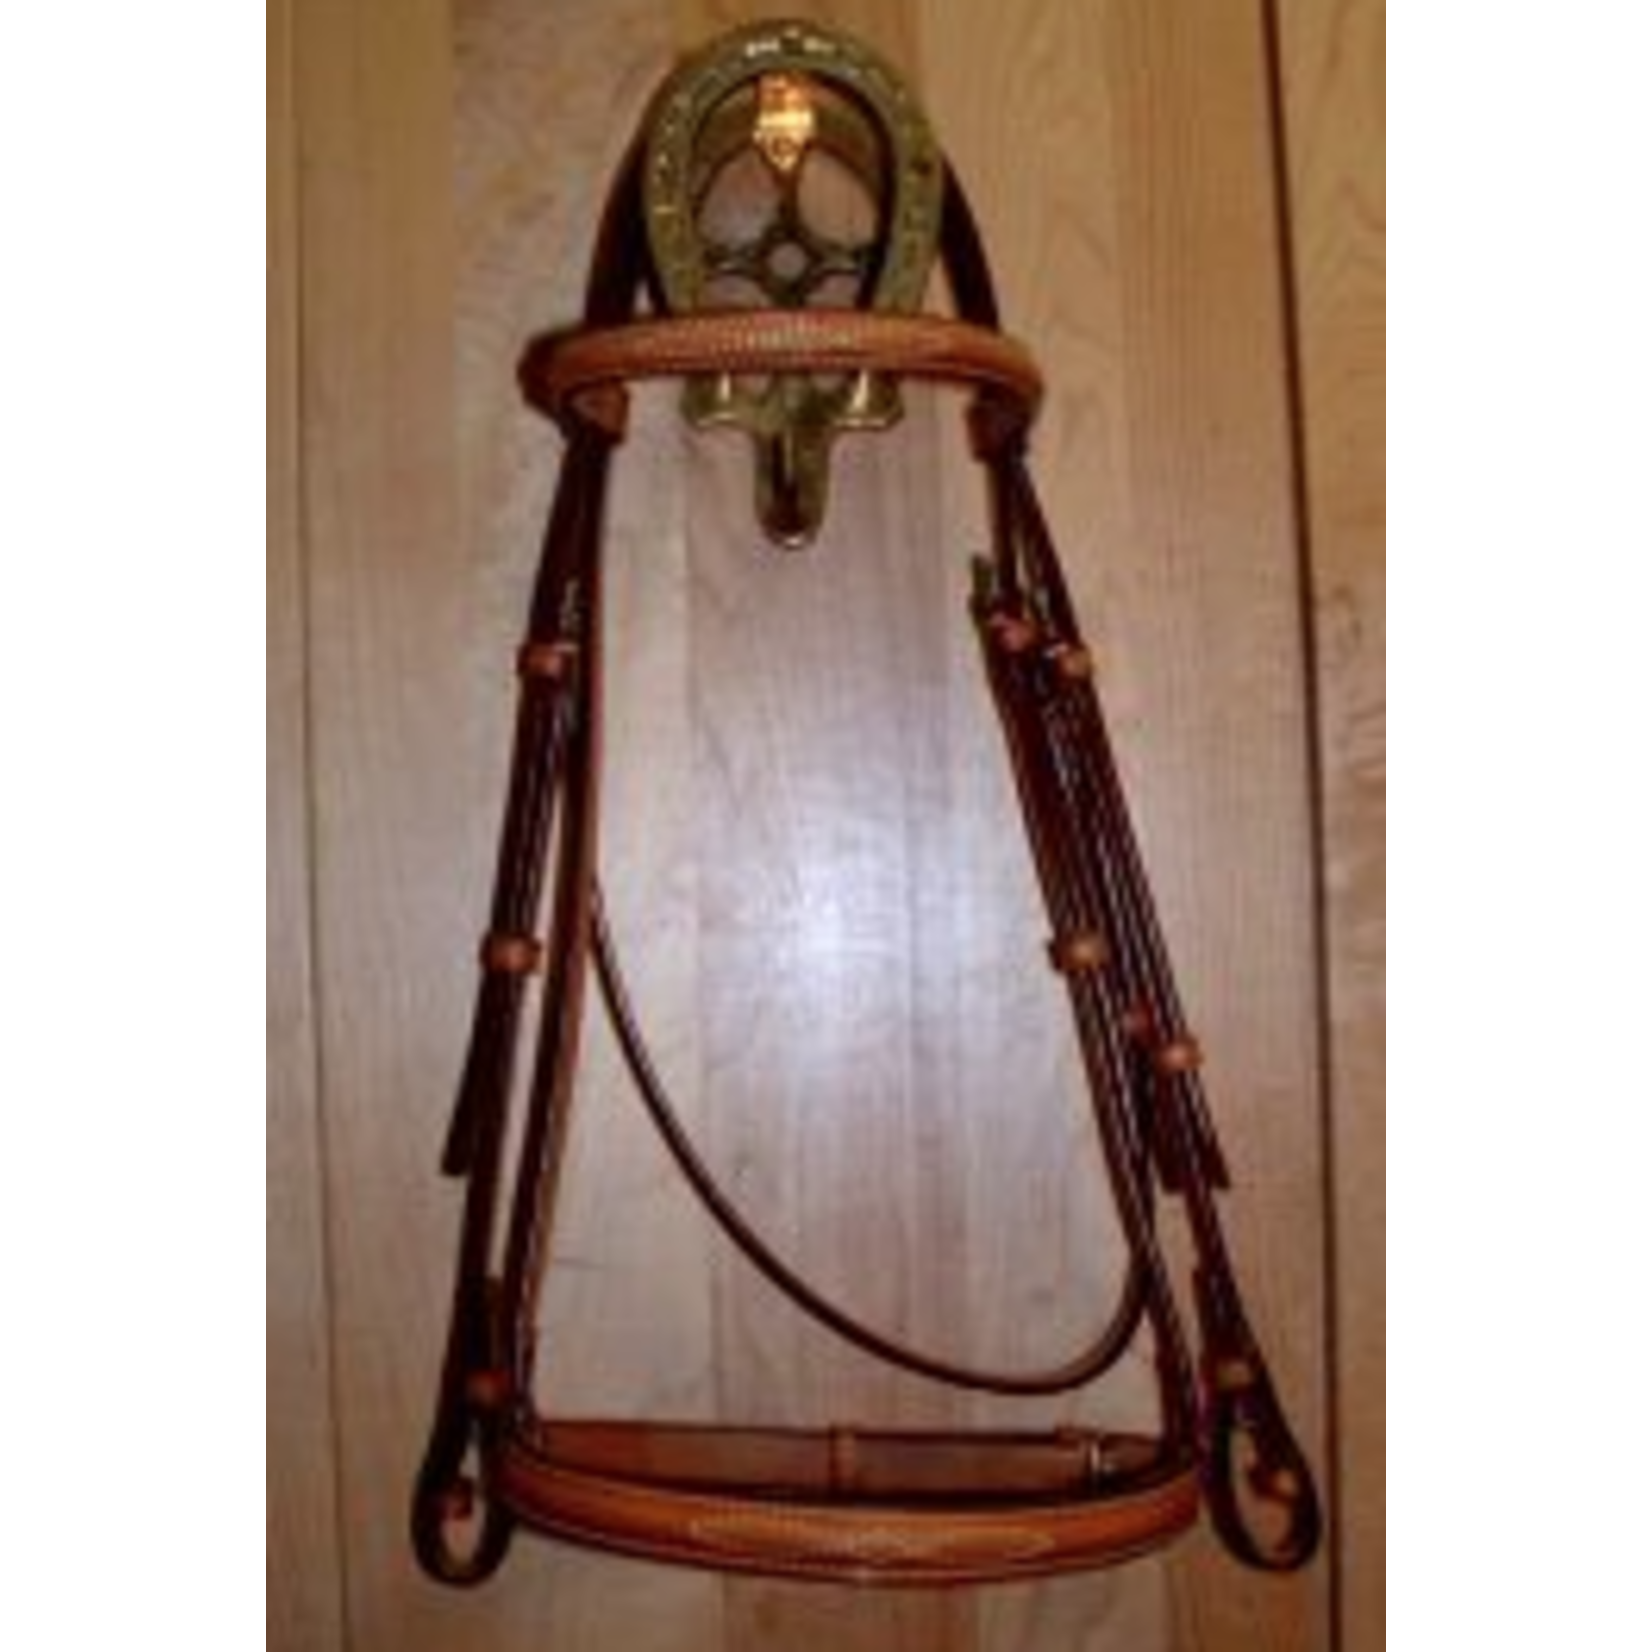 Equusport 21-BE Equusport Hunter Bridle, 1 1/8" noseband (small pony is 7/8"), lightly raised fancy stitch, steel buckles, matching reins sold seperatly